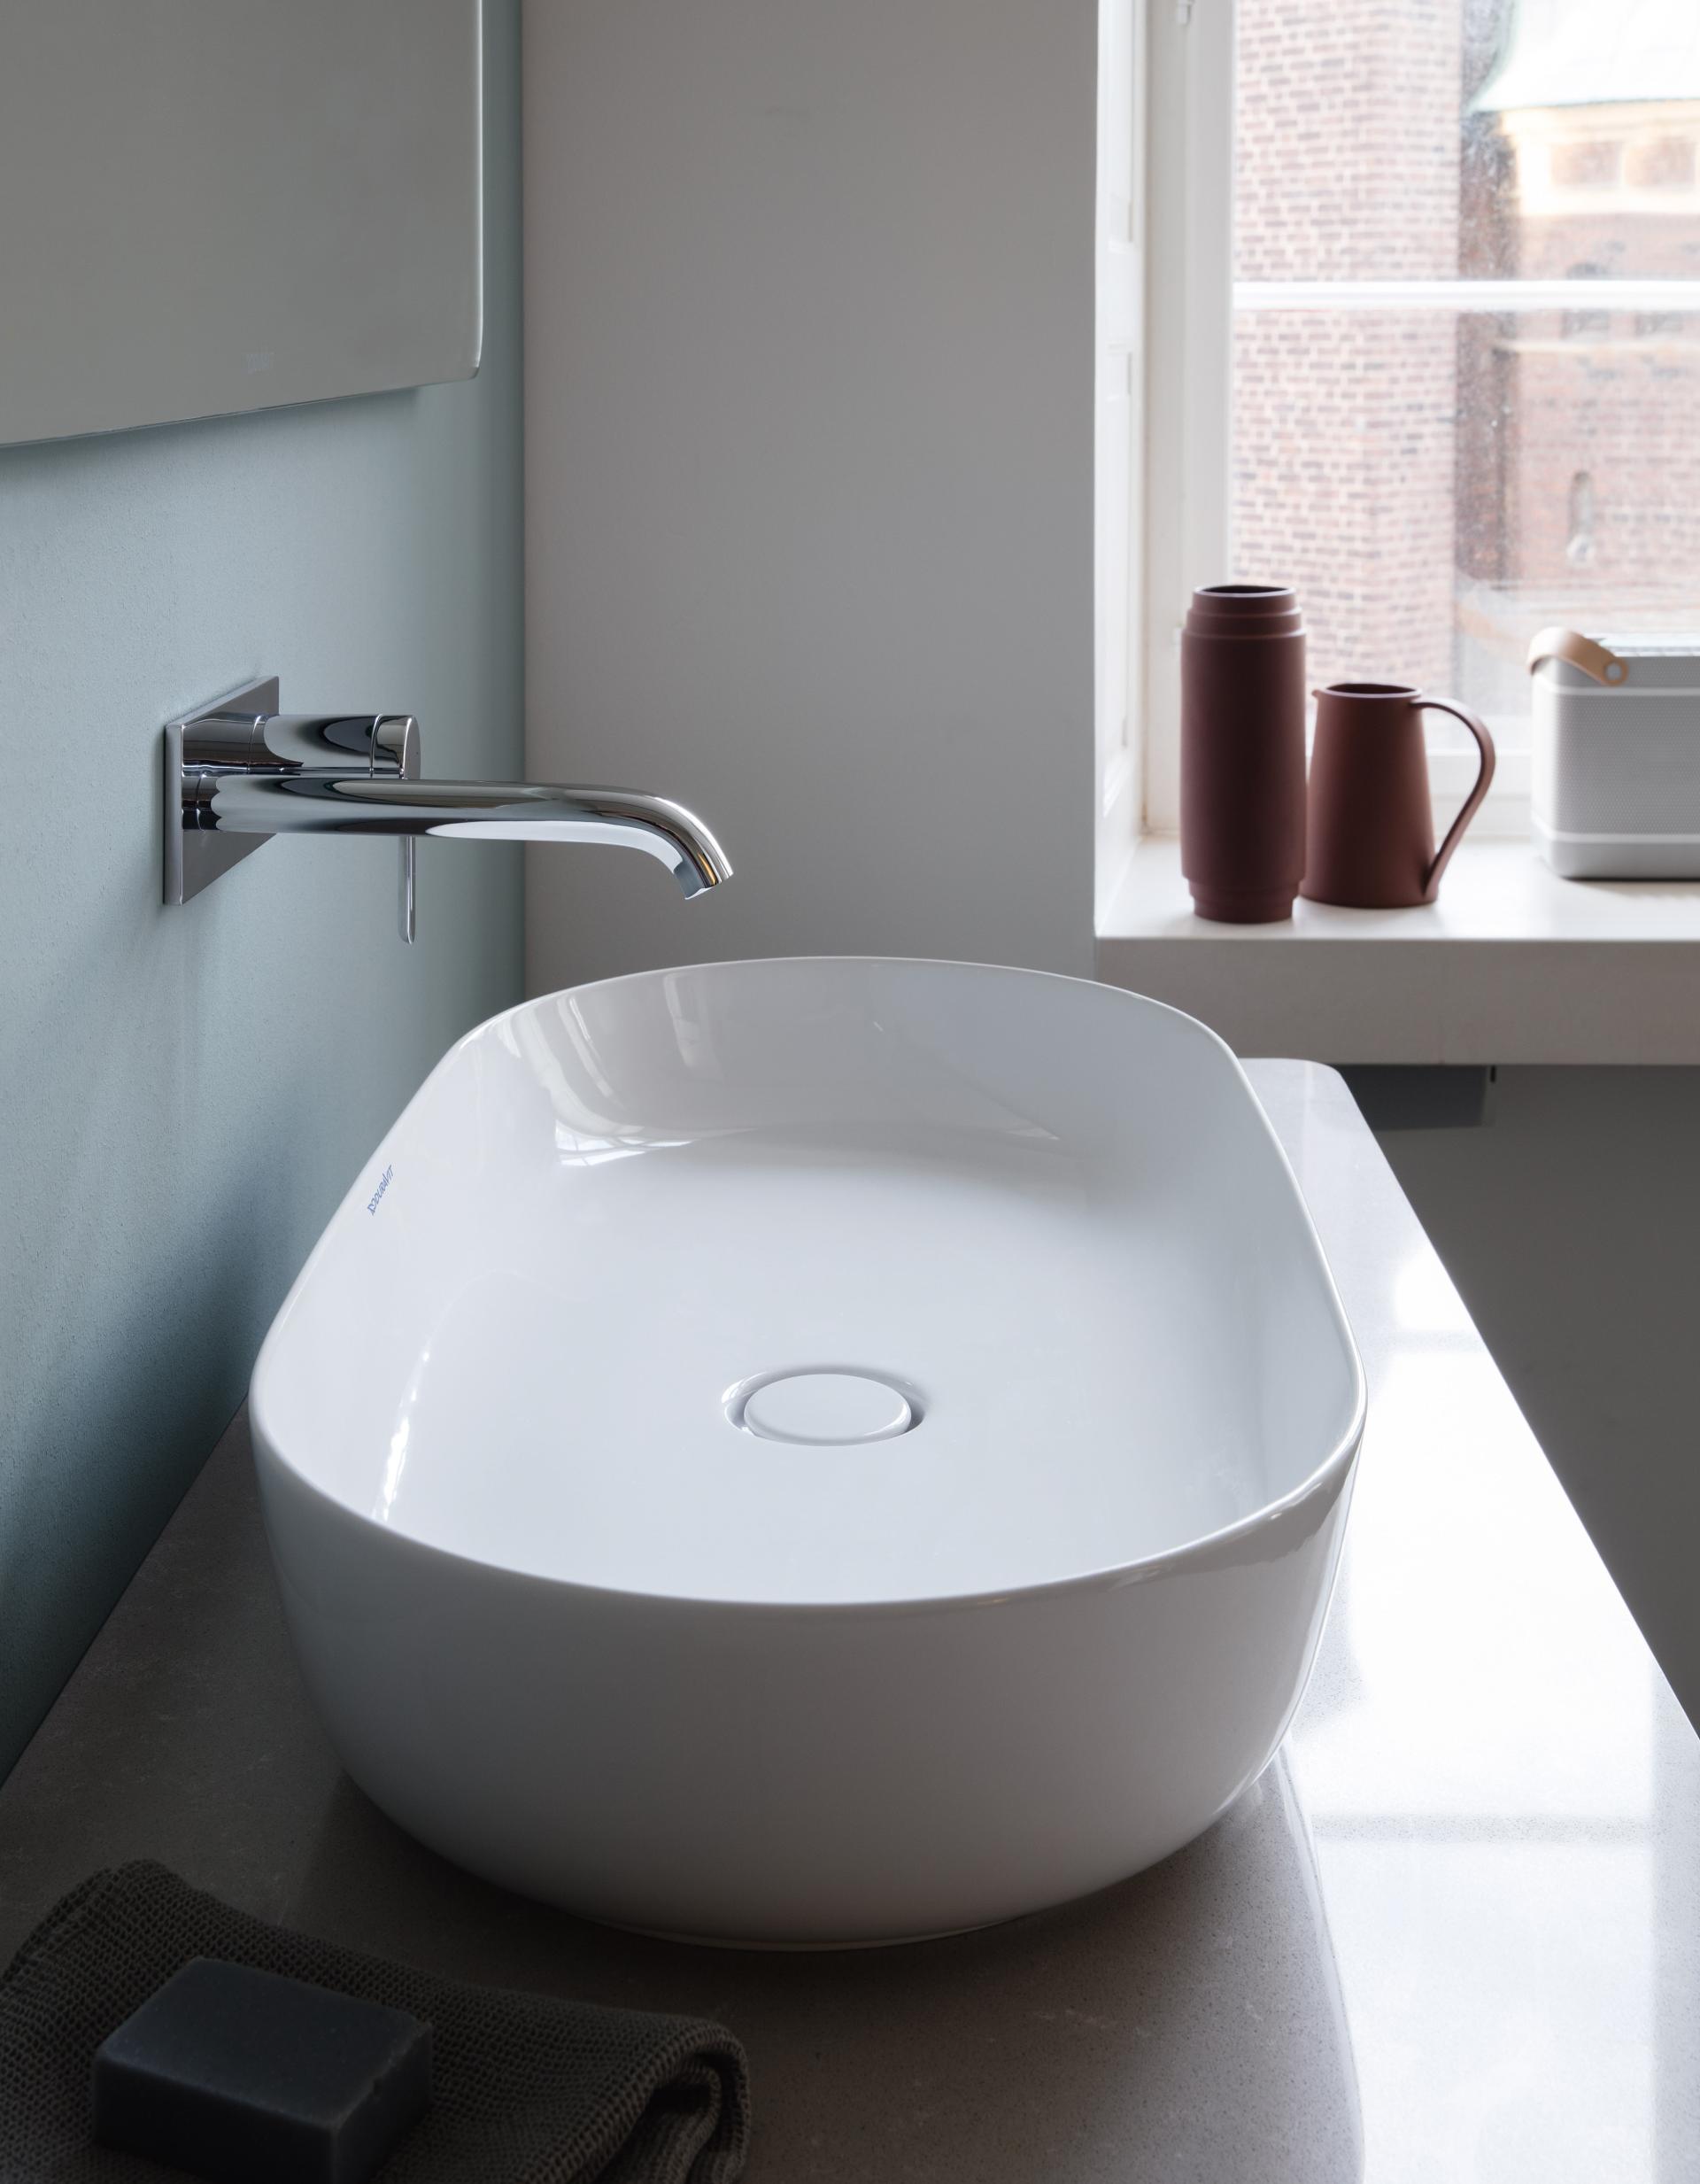 Luv washbowl with concealed basin mixer
